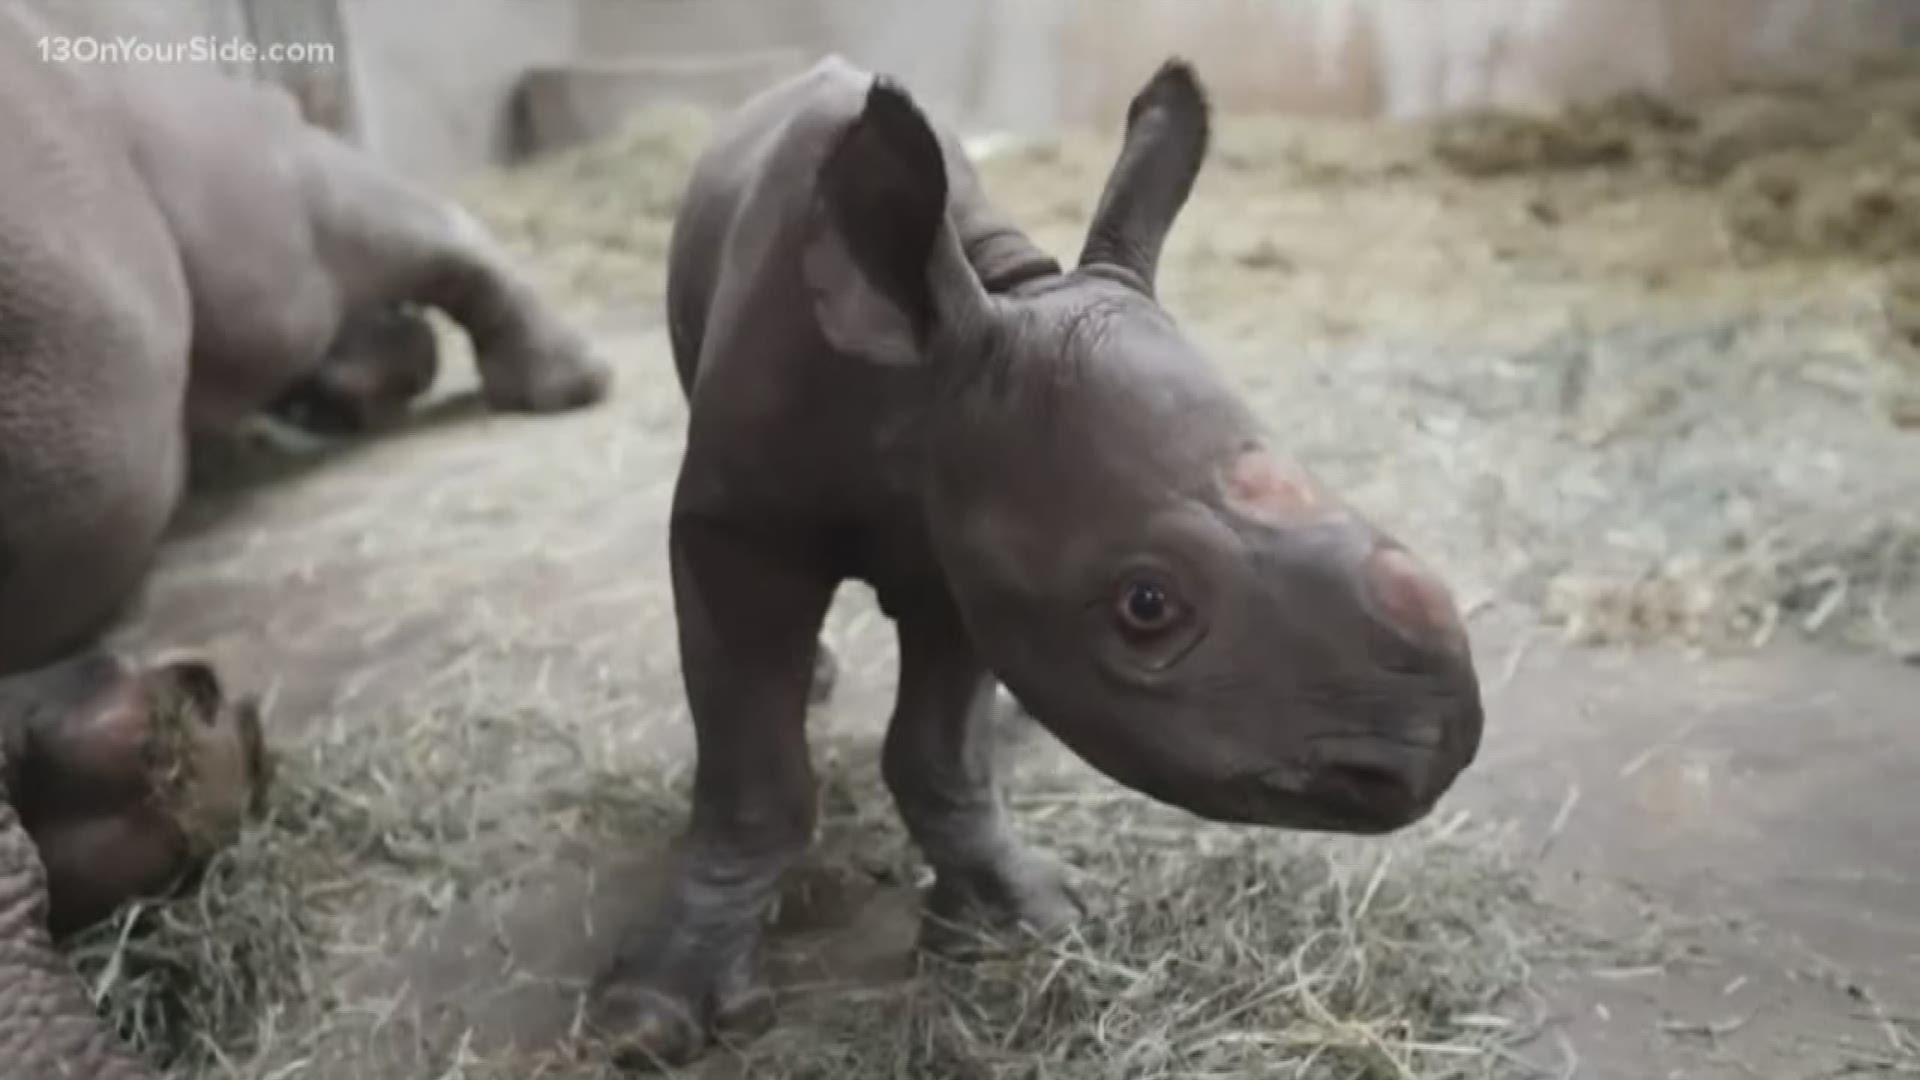 Potter Park Zoo is holding a naming contest for a rare black rhino calf that was born on Christmas Eve.